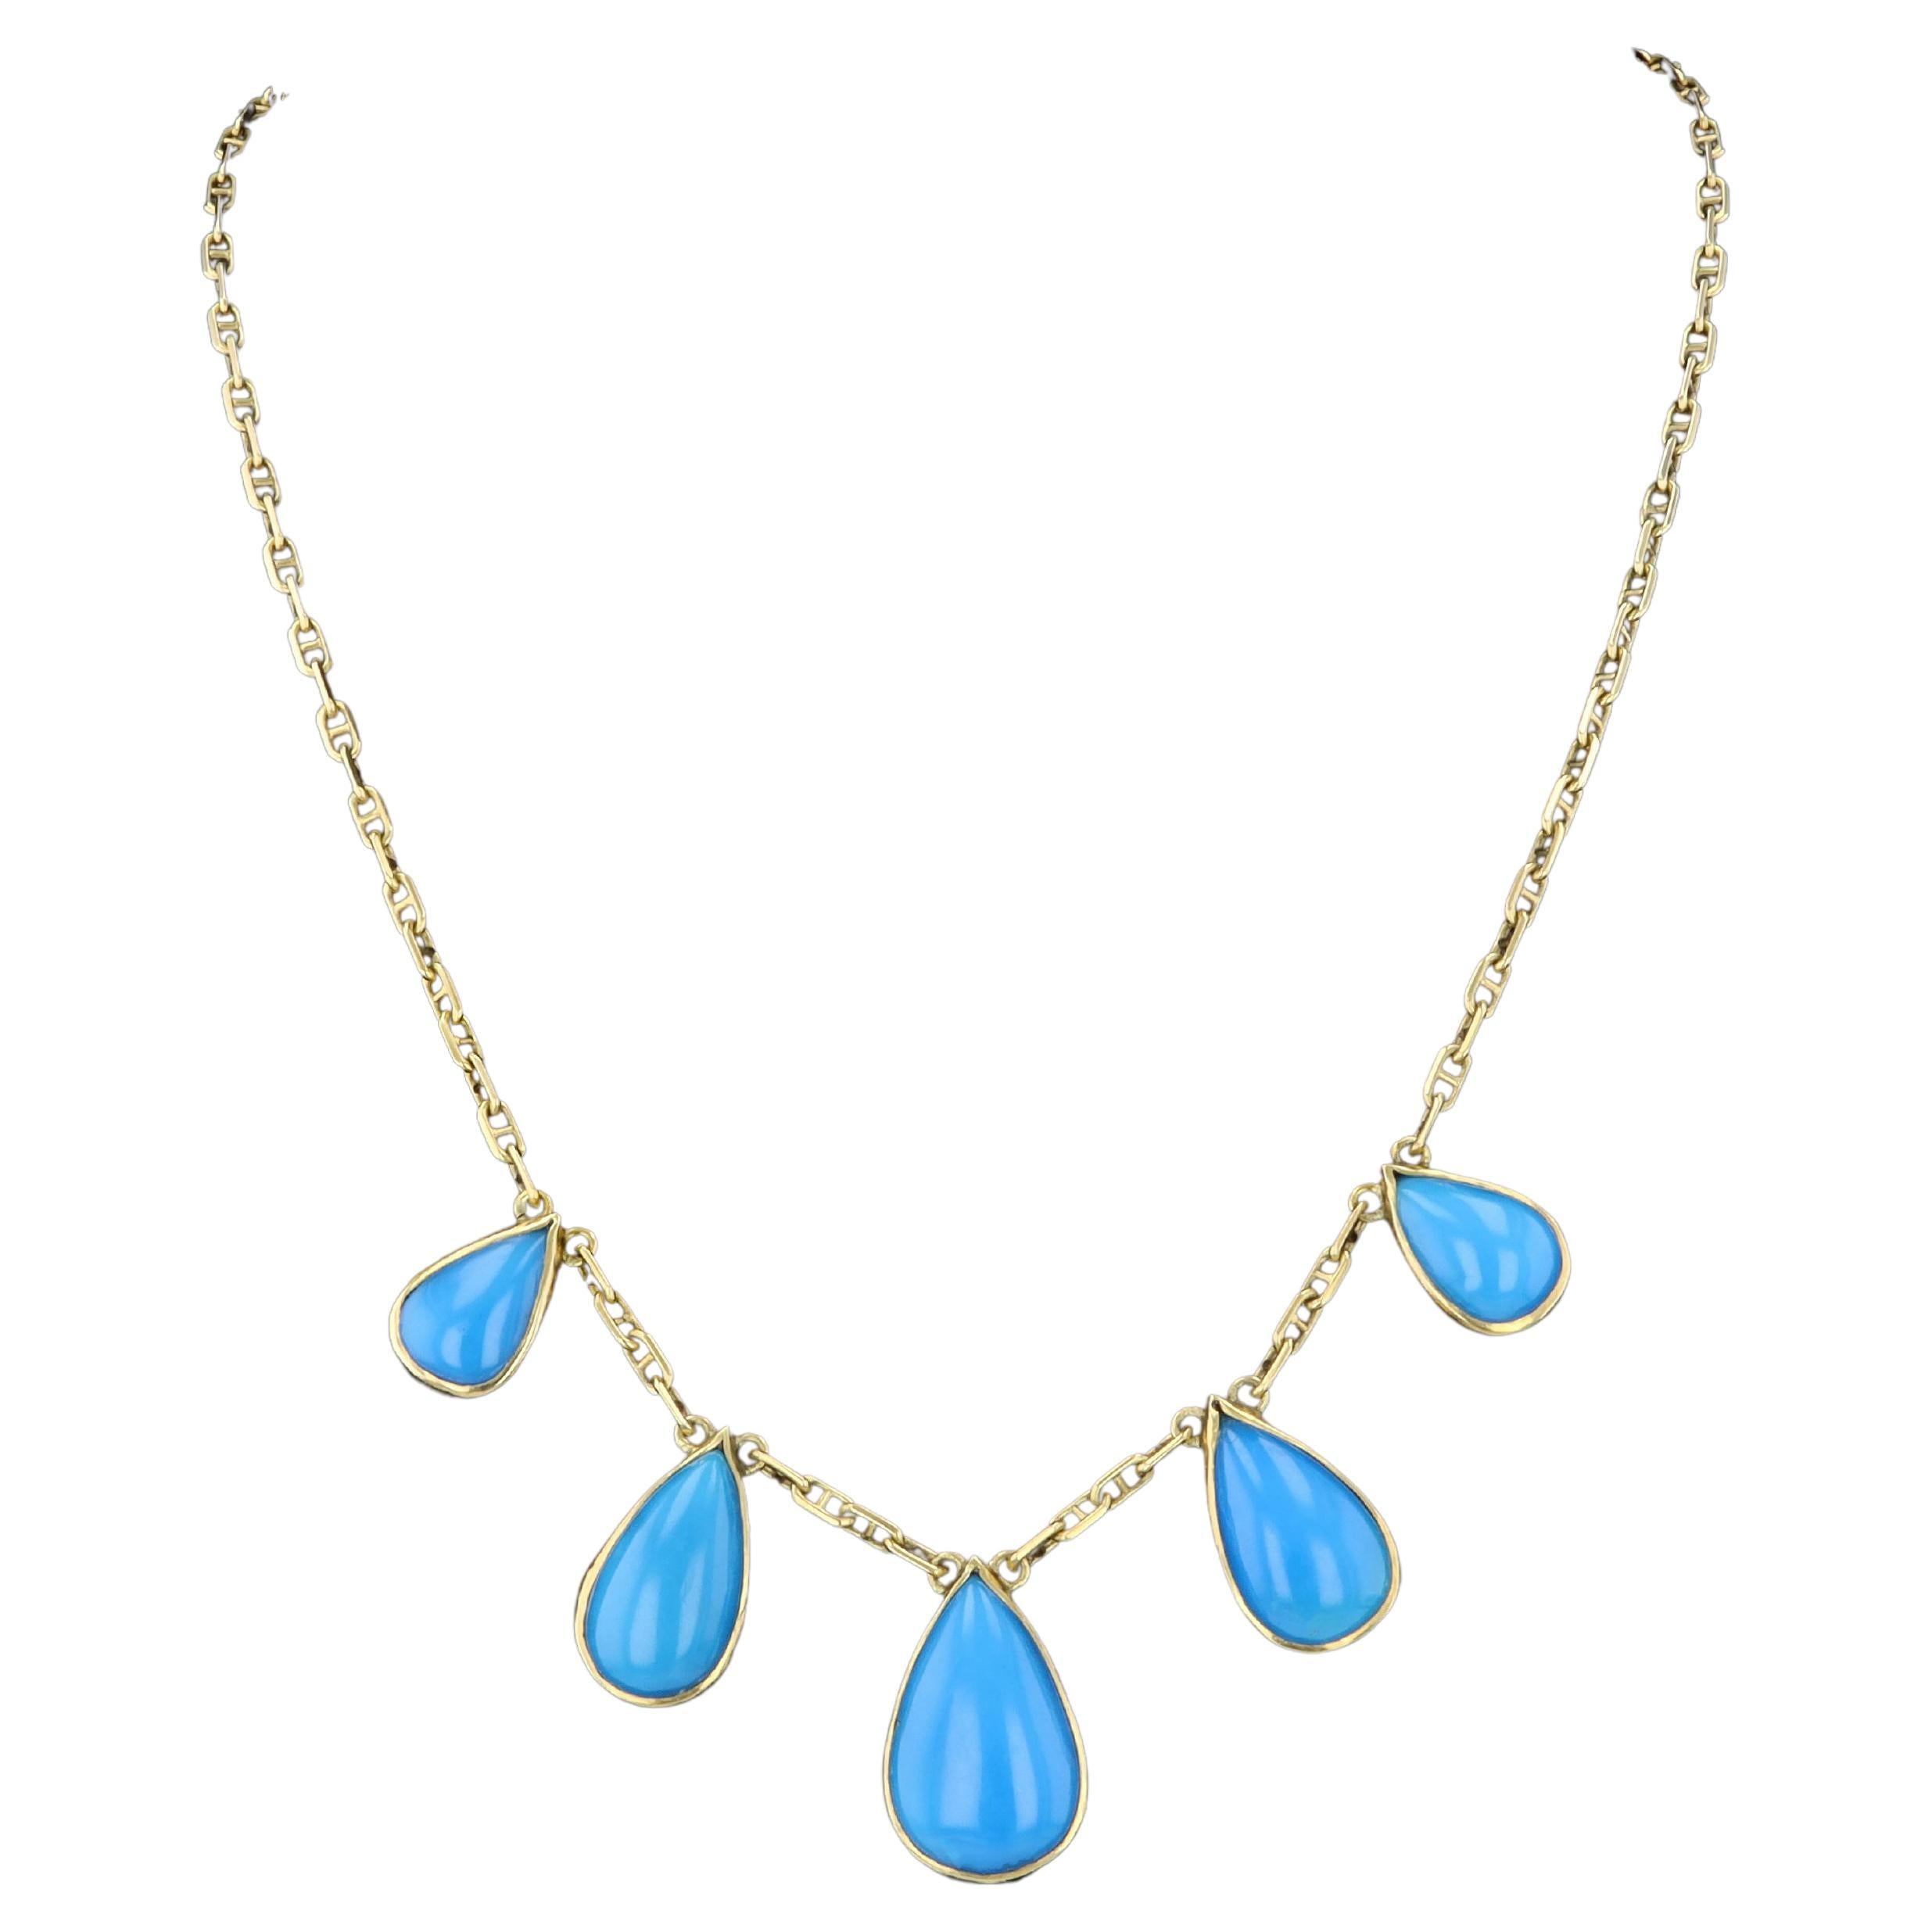 Vibrant Pear Cabochon Turquoise and 18k Yellow Gold Necklace For Sale